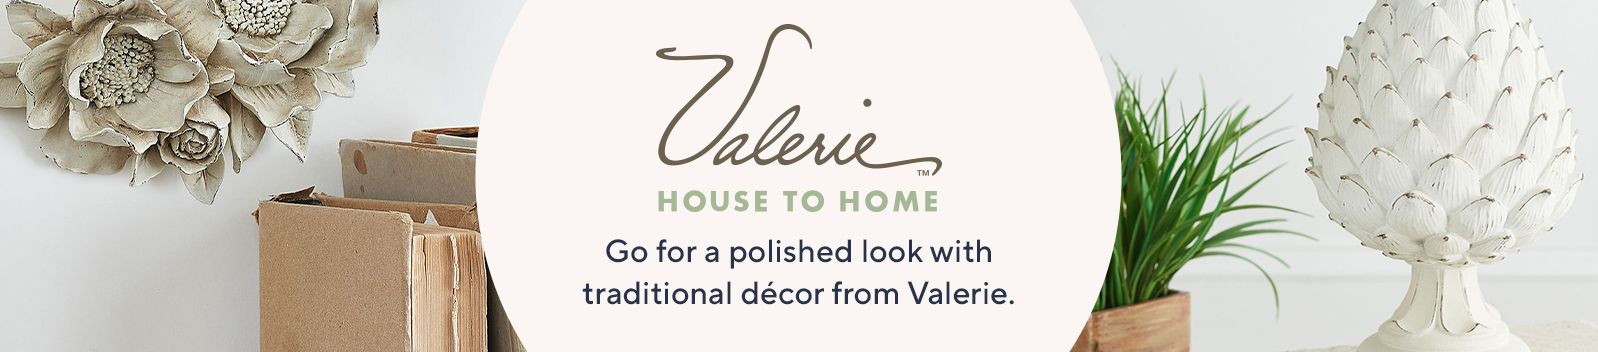 Valerie House to Home. Go for a polished look with traditional décor from Valerie.